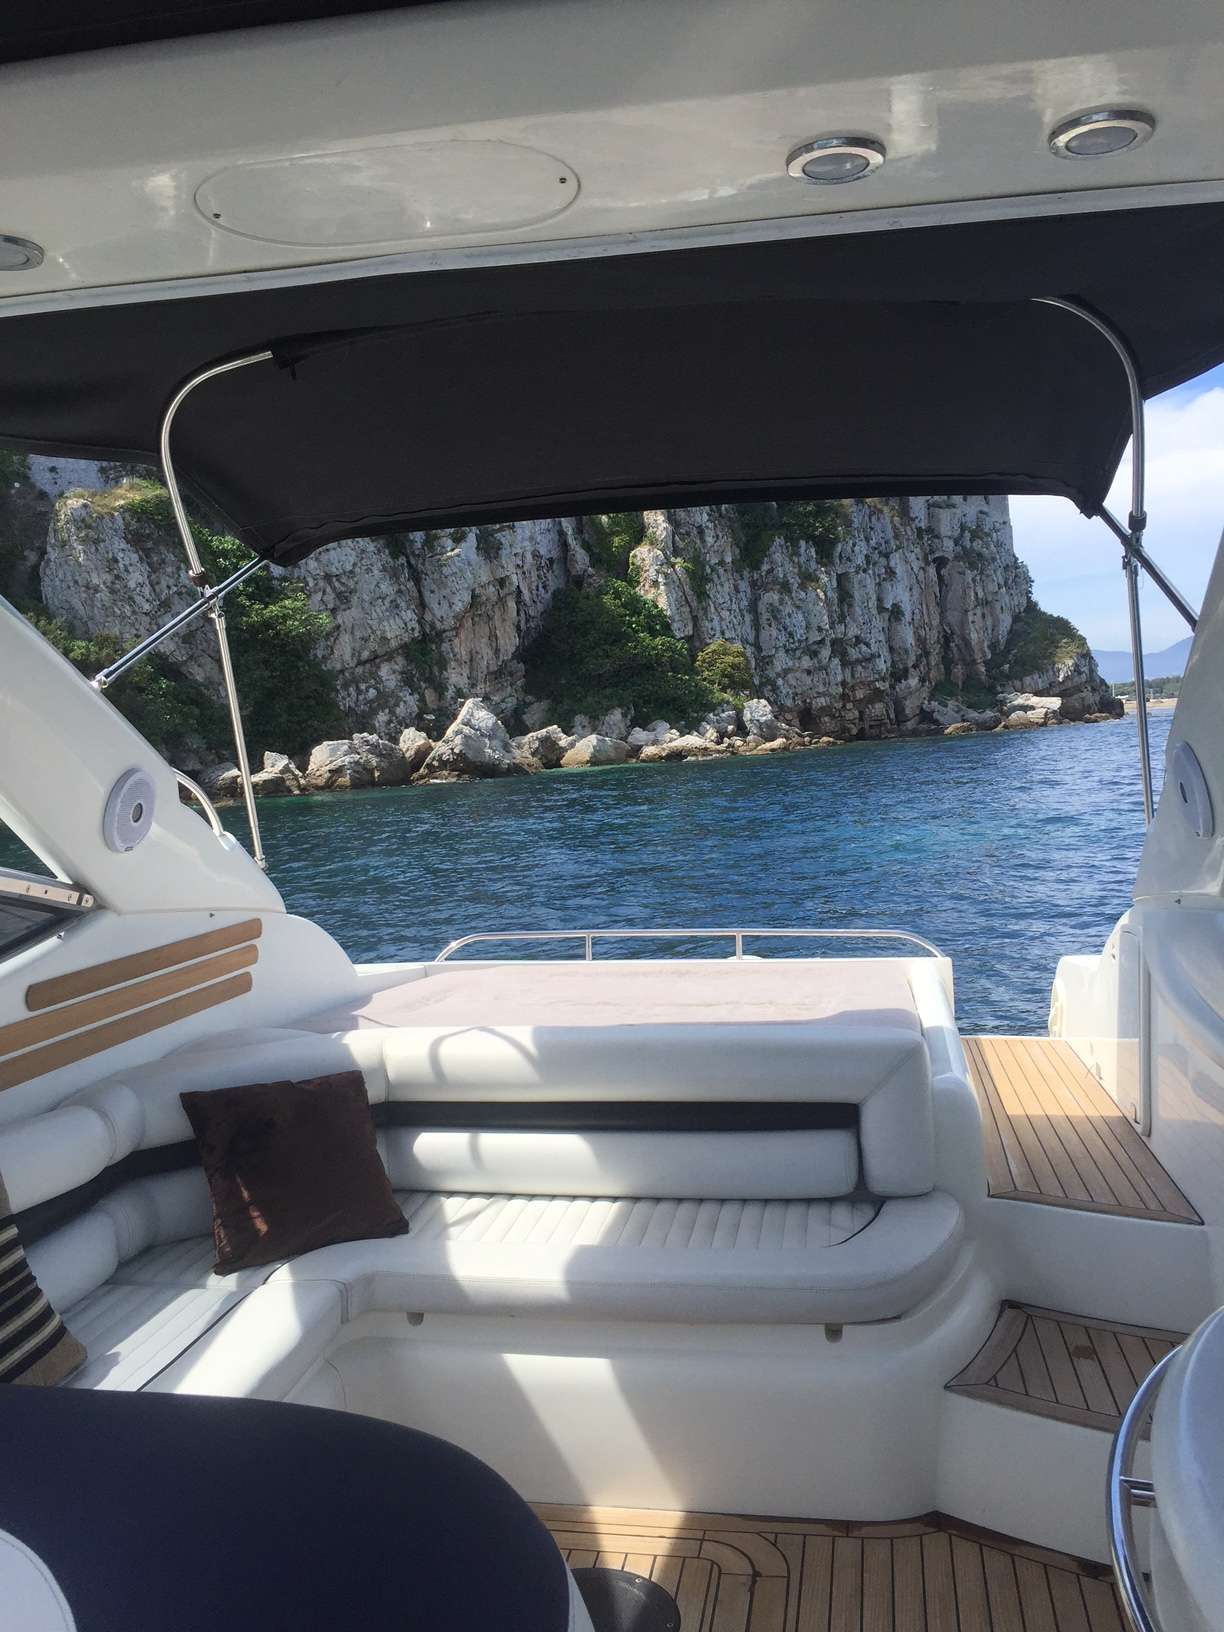 Sunseeker 48 - Motor Boat Charter France & Boat hire in France French Riviera Cannes Vieux port de Vallauris 5